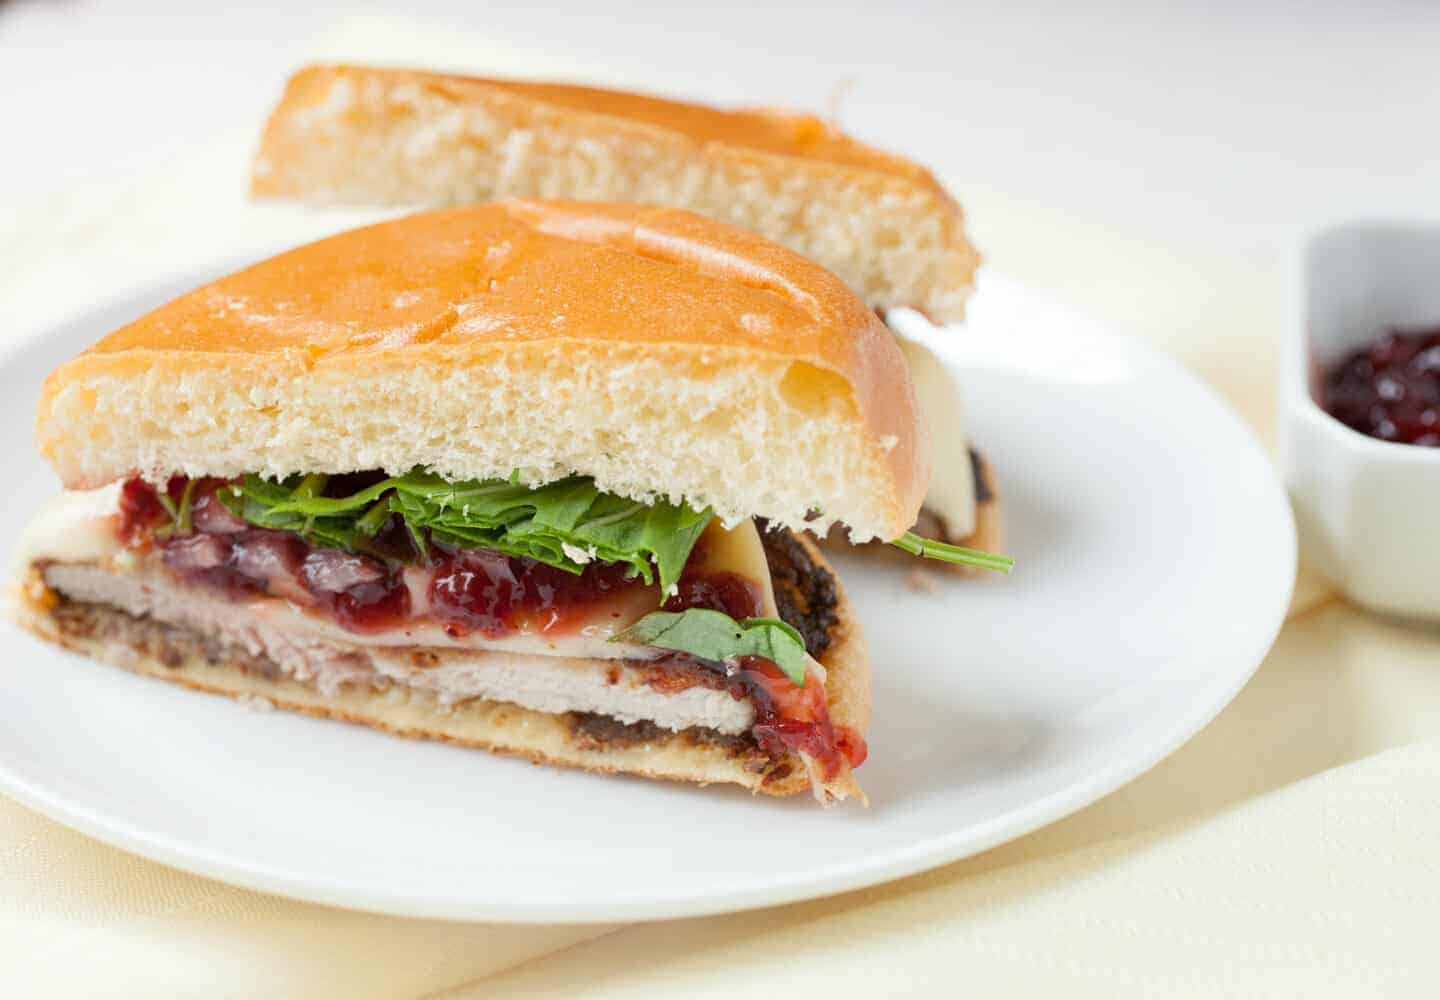 Pork Schnitzel Sandwiches: Delicious fried pork cutlets served on soft buns with traditional German toppings. One of my favorite sandwiches! | macheesmo.com